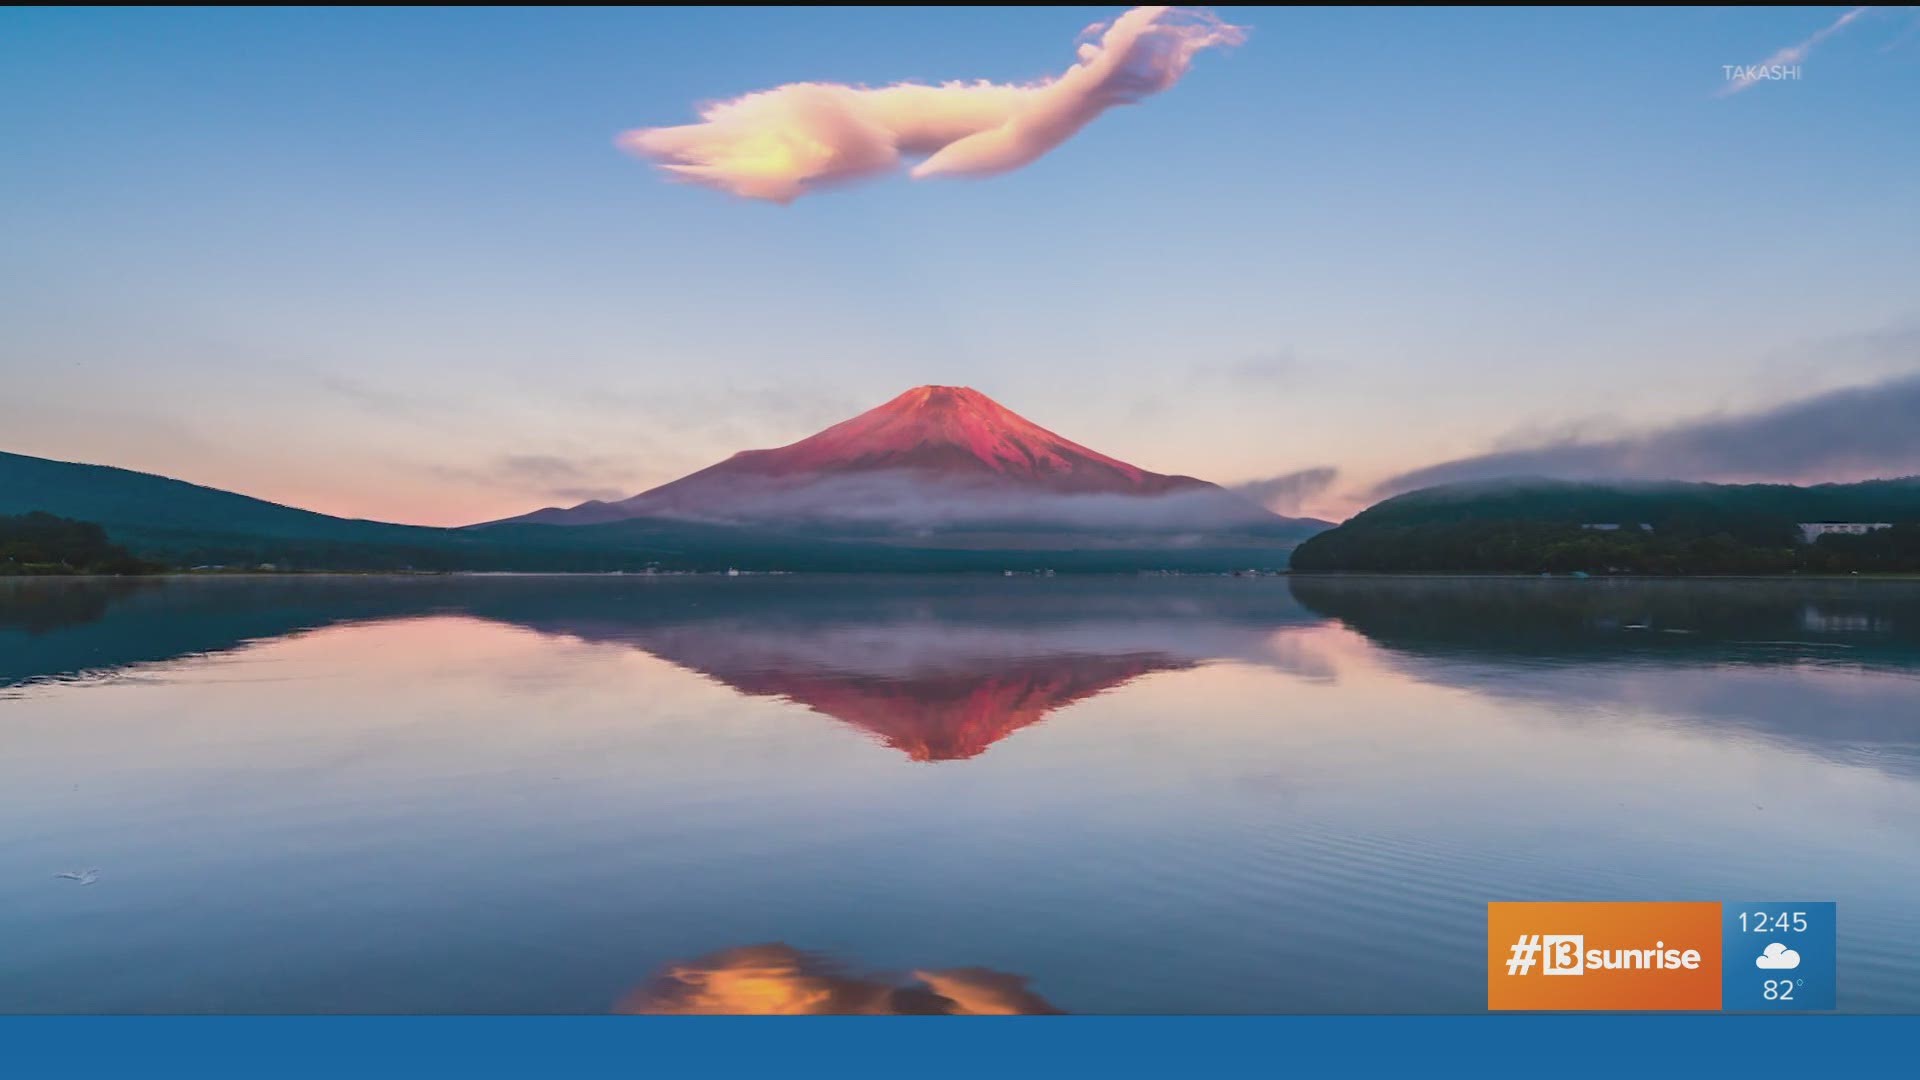 Ahead of the summer Olympic games in Tokyo, we're getting a look at the most iconic place in Japan, Mt. Fuji.